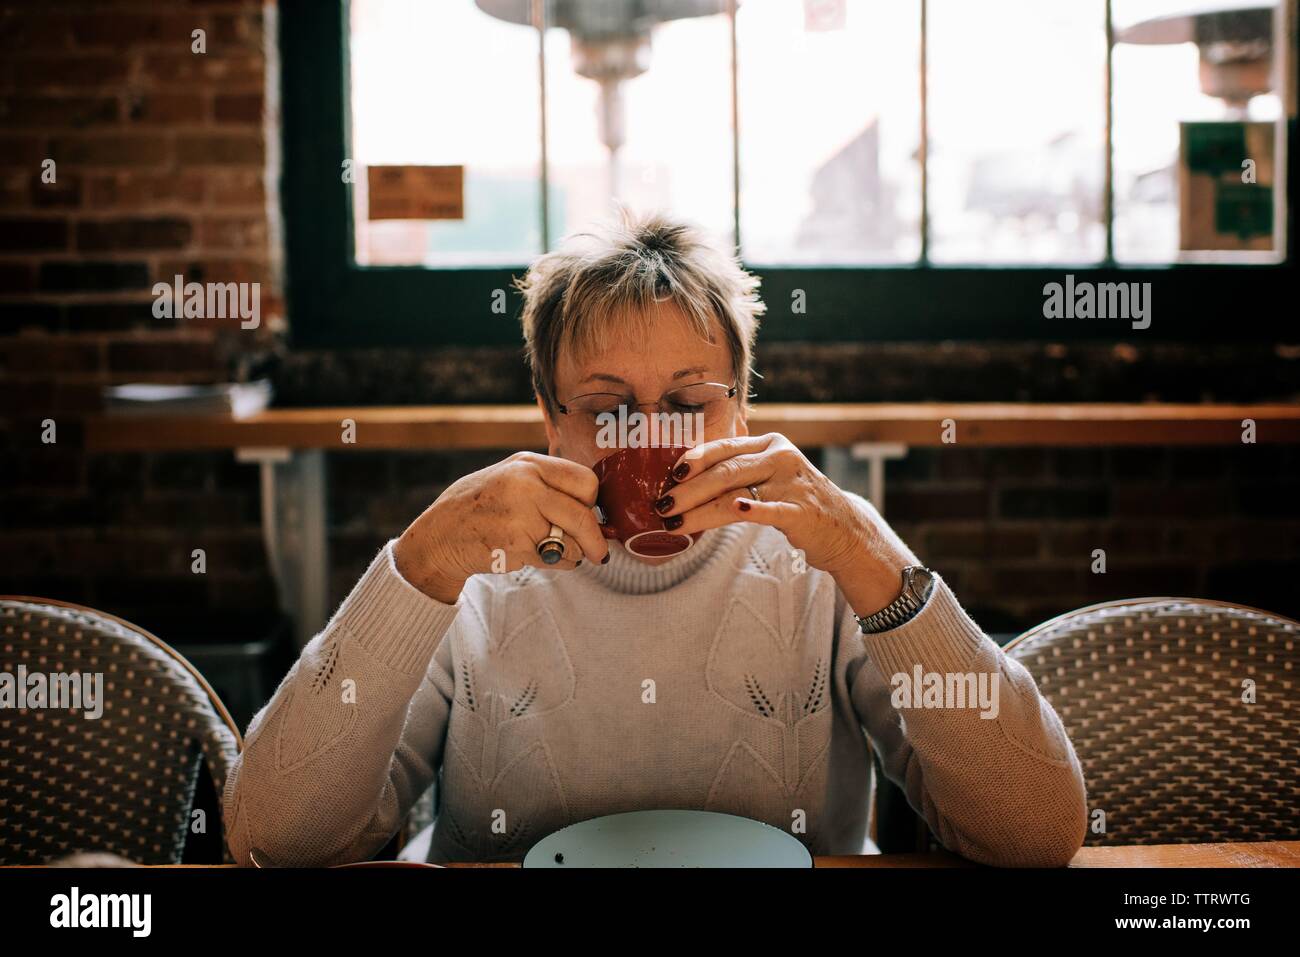 woman in her 60's drinking a cup of coffee in a cafe Stock Photo